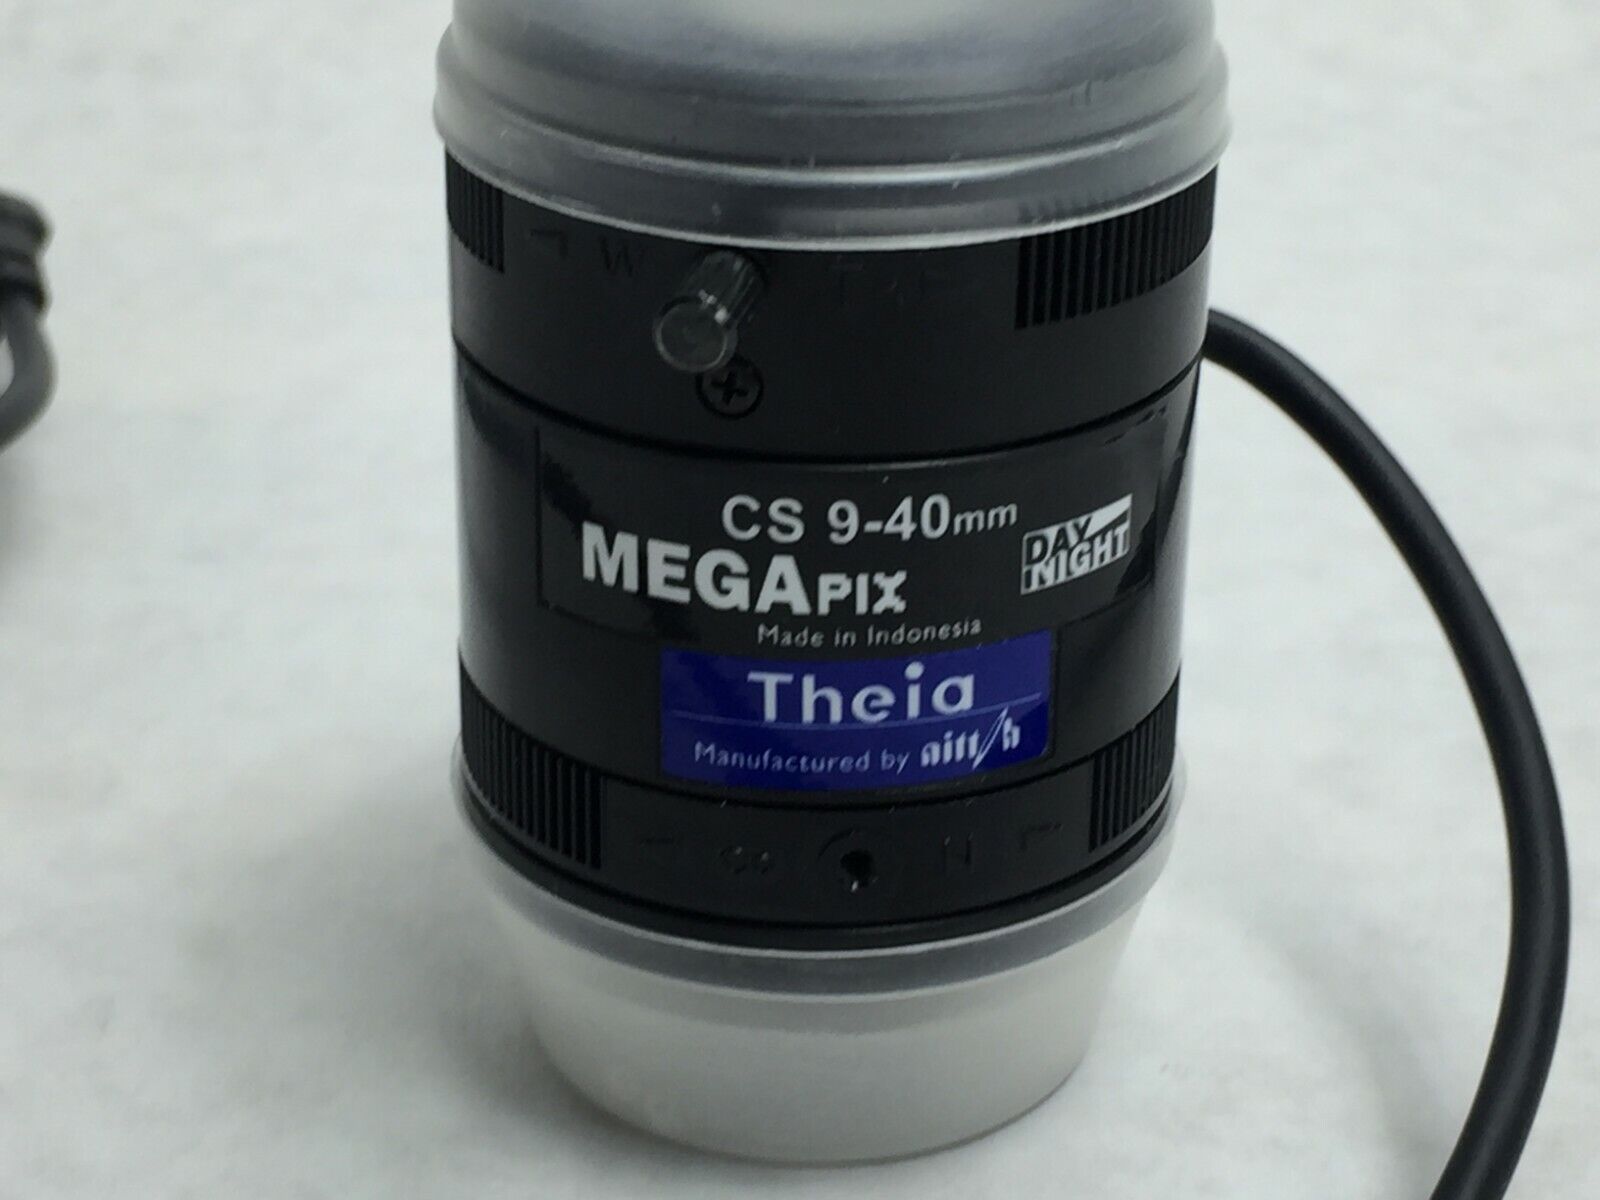 Theia CS 9-40mm MegaPIX Day/Night  w/ Lens Cover-shows in pictures